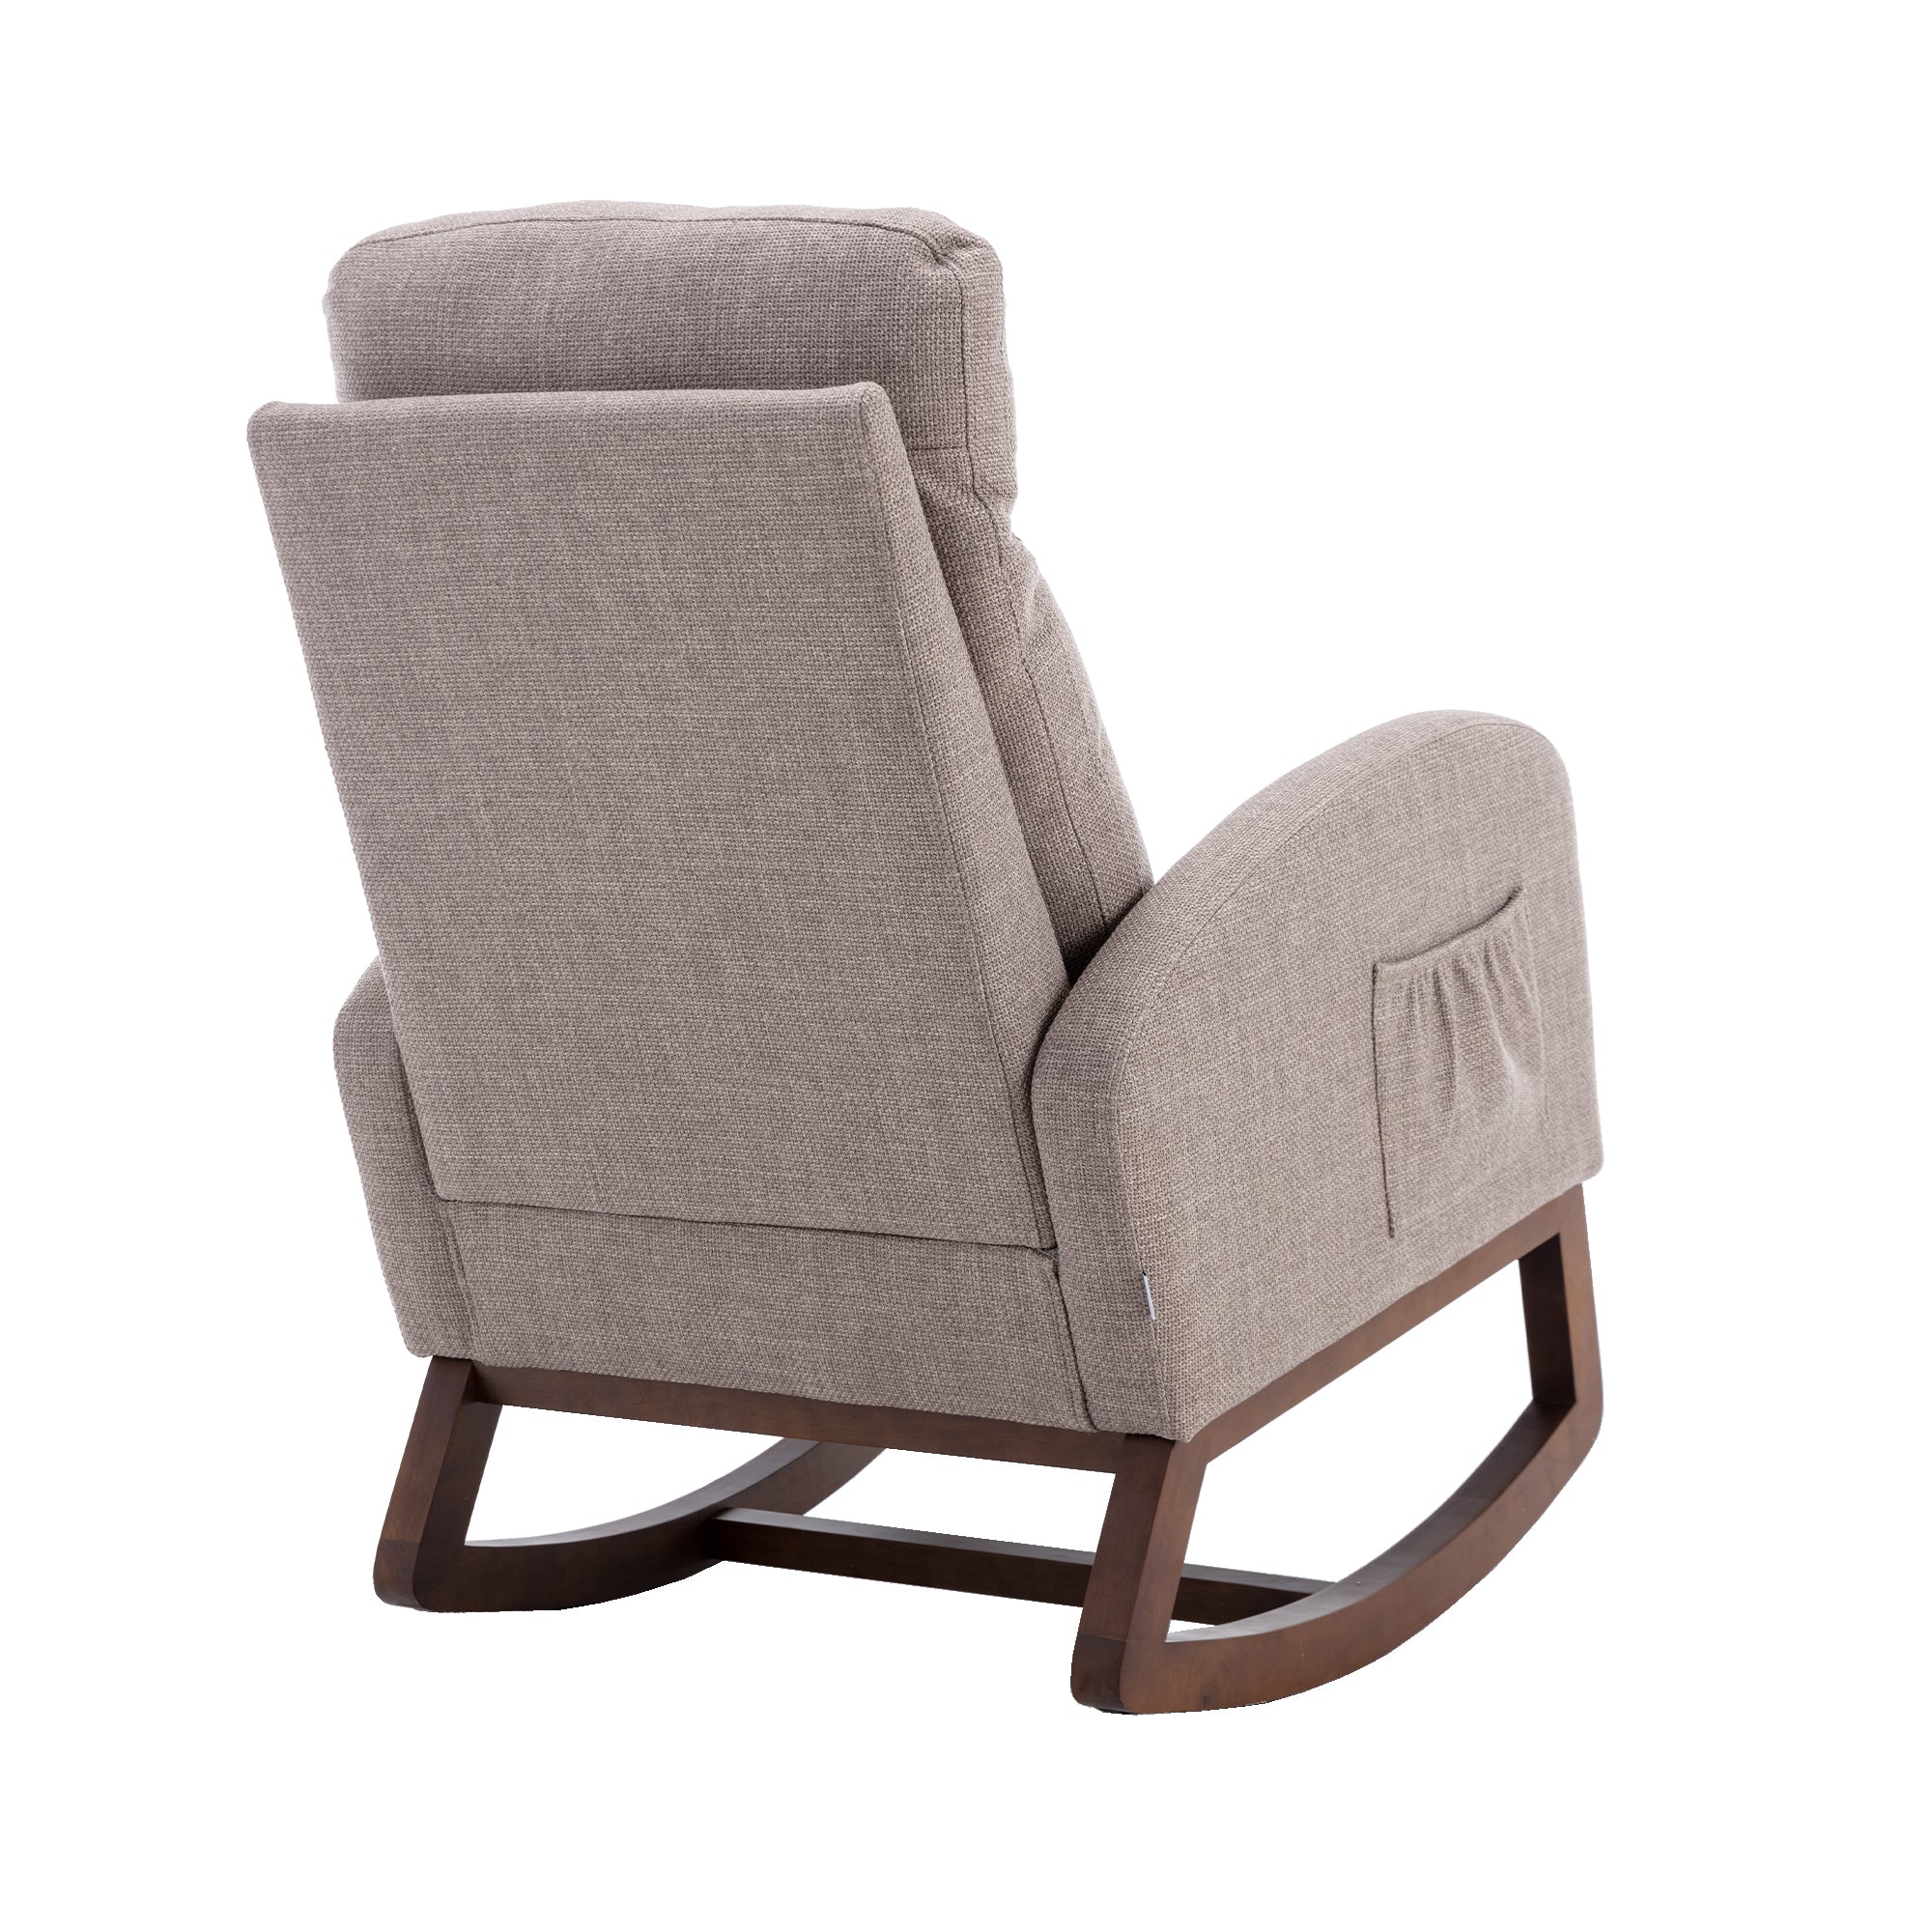 COOLMORE living room Comfortable rocking chair living grey-solid wood